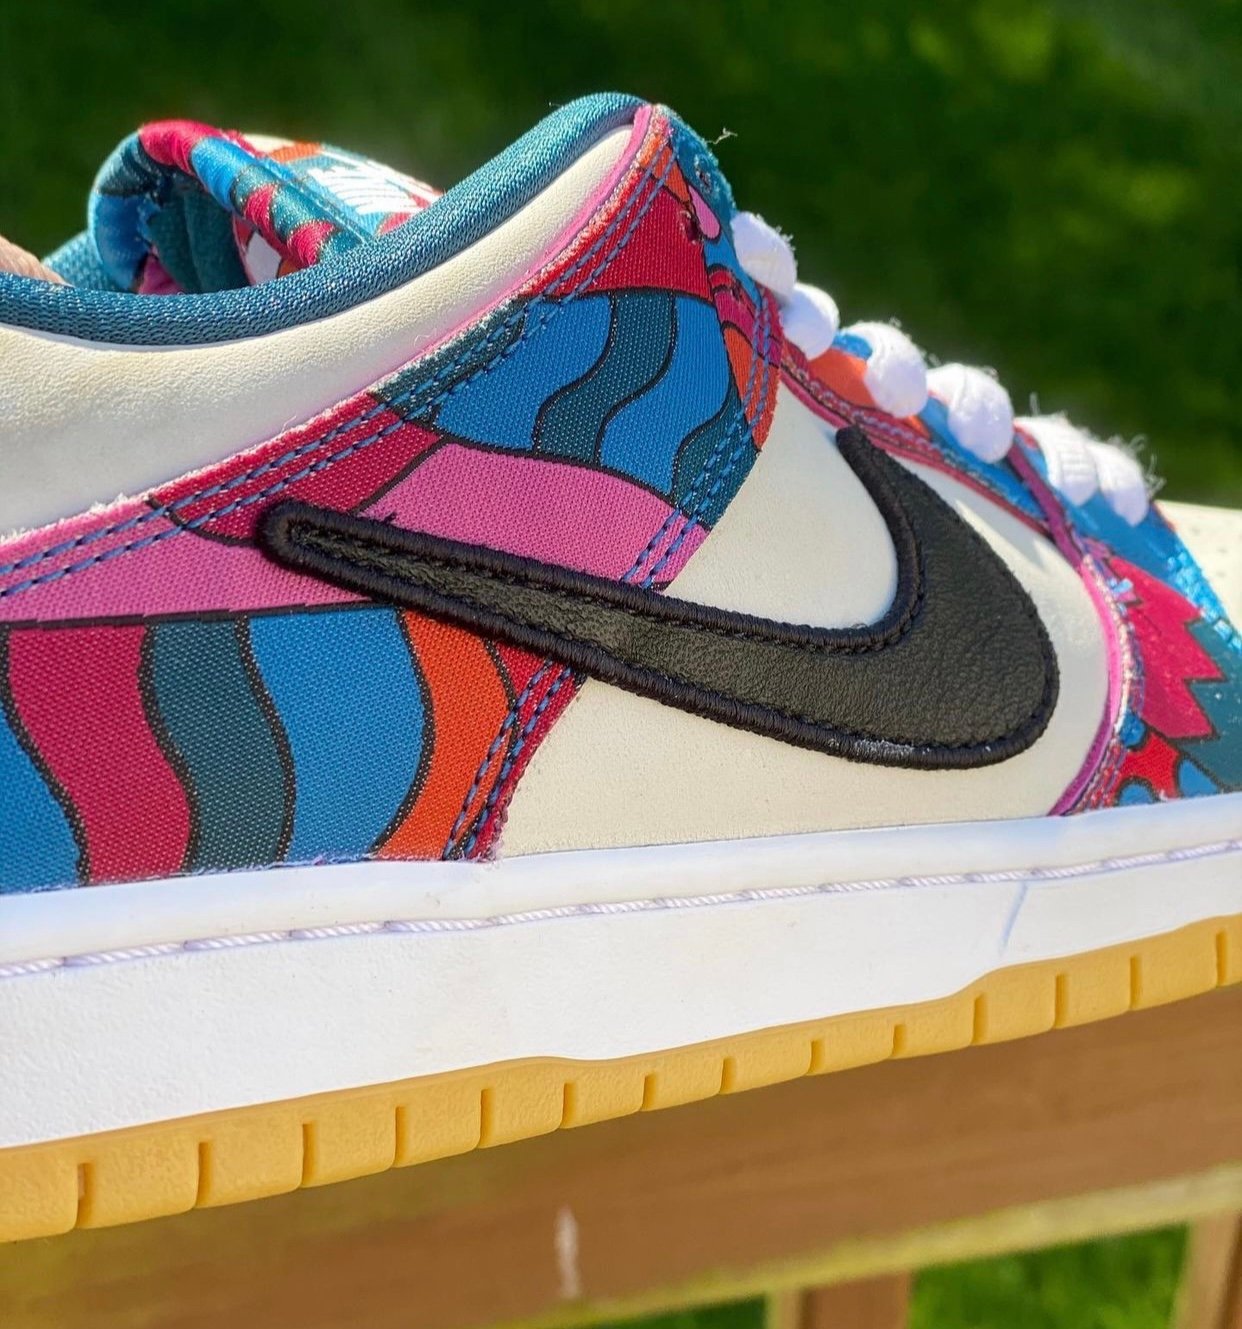 Parra x Nike SB Dunk Low DH7695-102 Release Date